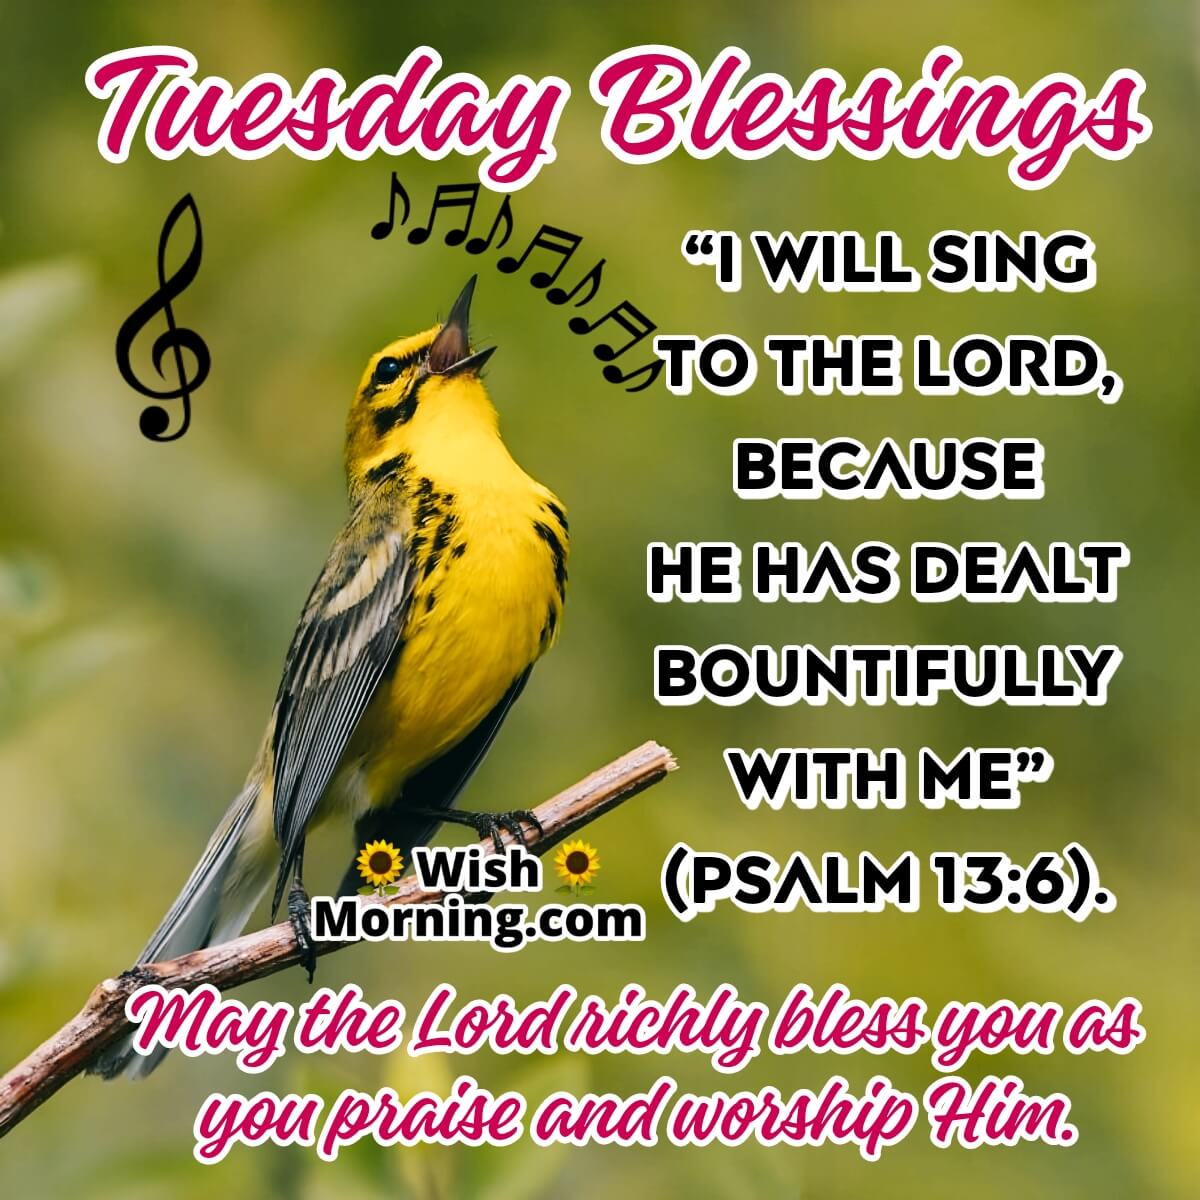 blessed tuesday morning